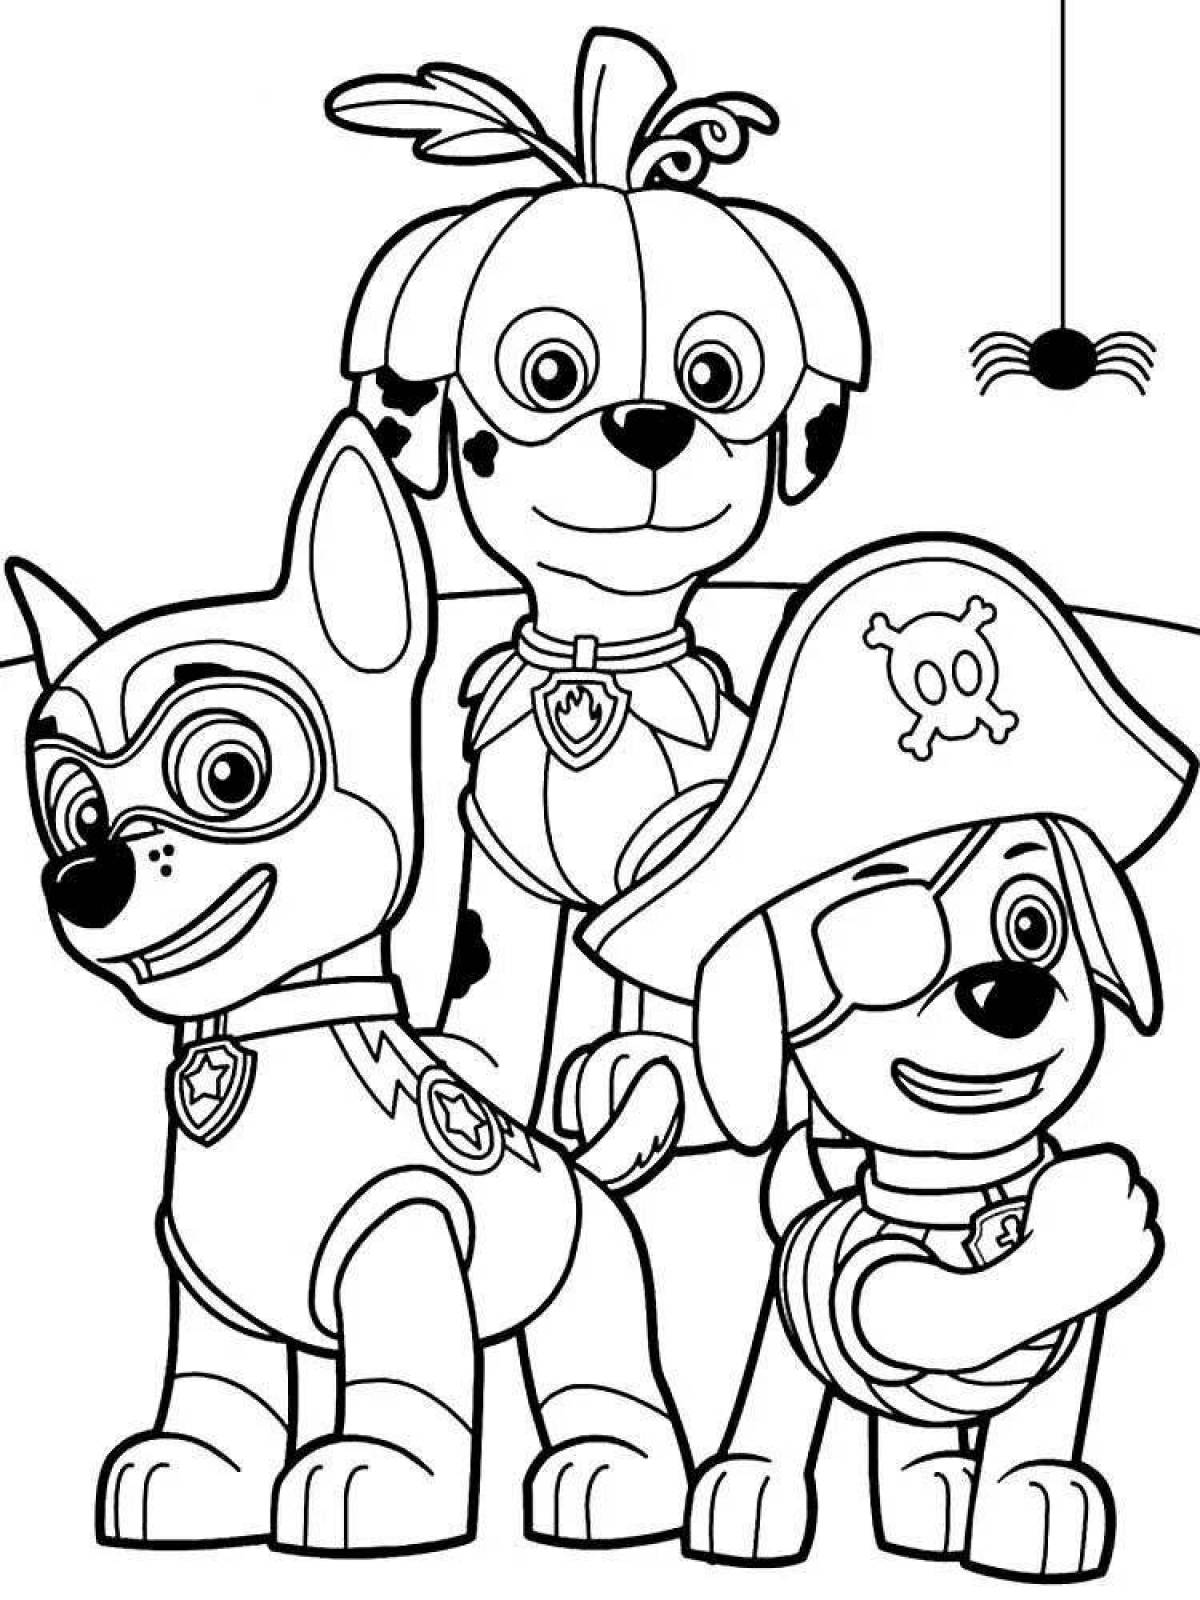 Great paw patrol coloring book for boys